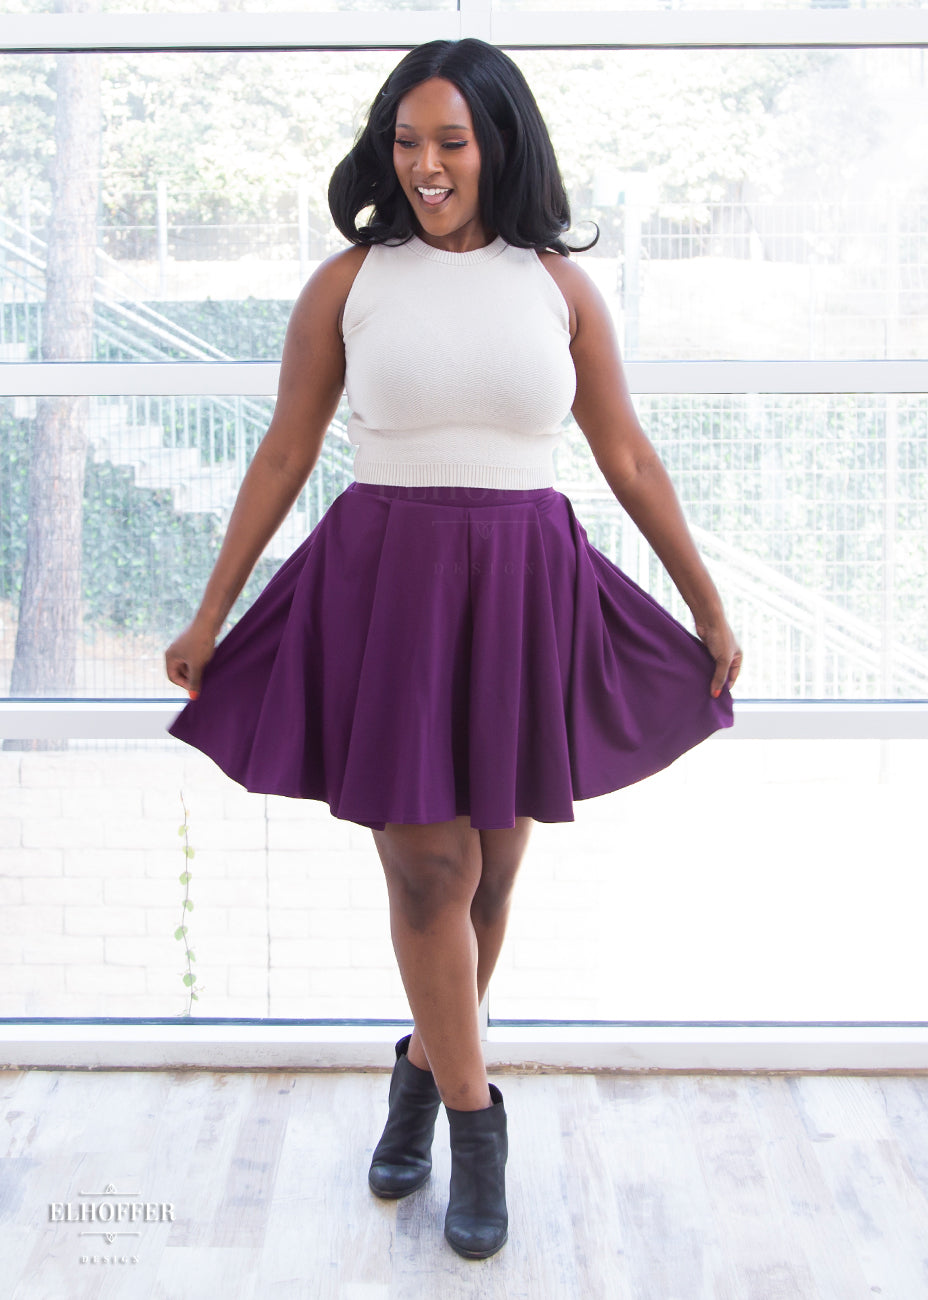 Lynsi (a dark skinned size M model with long dark hair) models the knee length pleated plum purple skirt with pockets. She pairs it with a stone beige knit sleeveless Susan crop top.